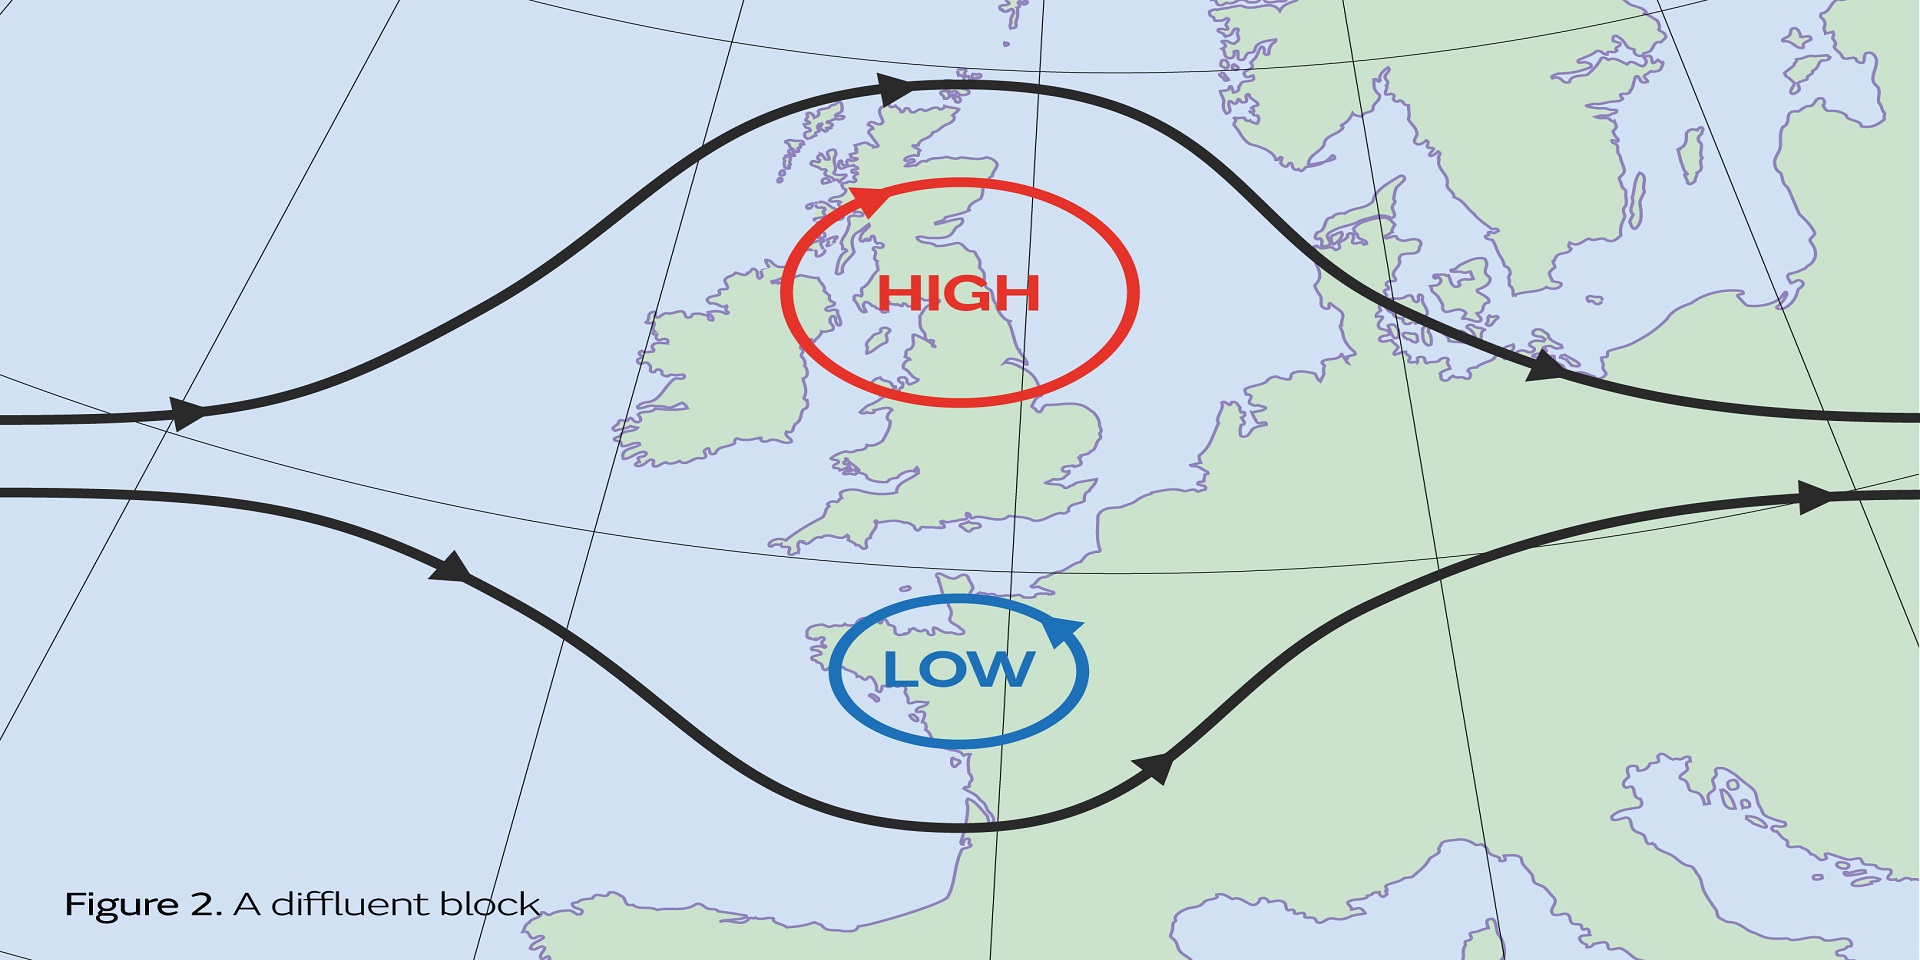 An example of the Diffluent Block, where there is a split in the eastwards flow, with a closed high centre to the north of a closed low centre in the south.